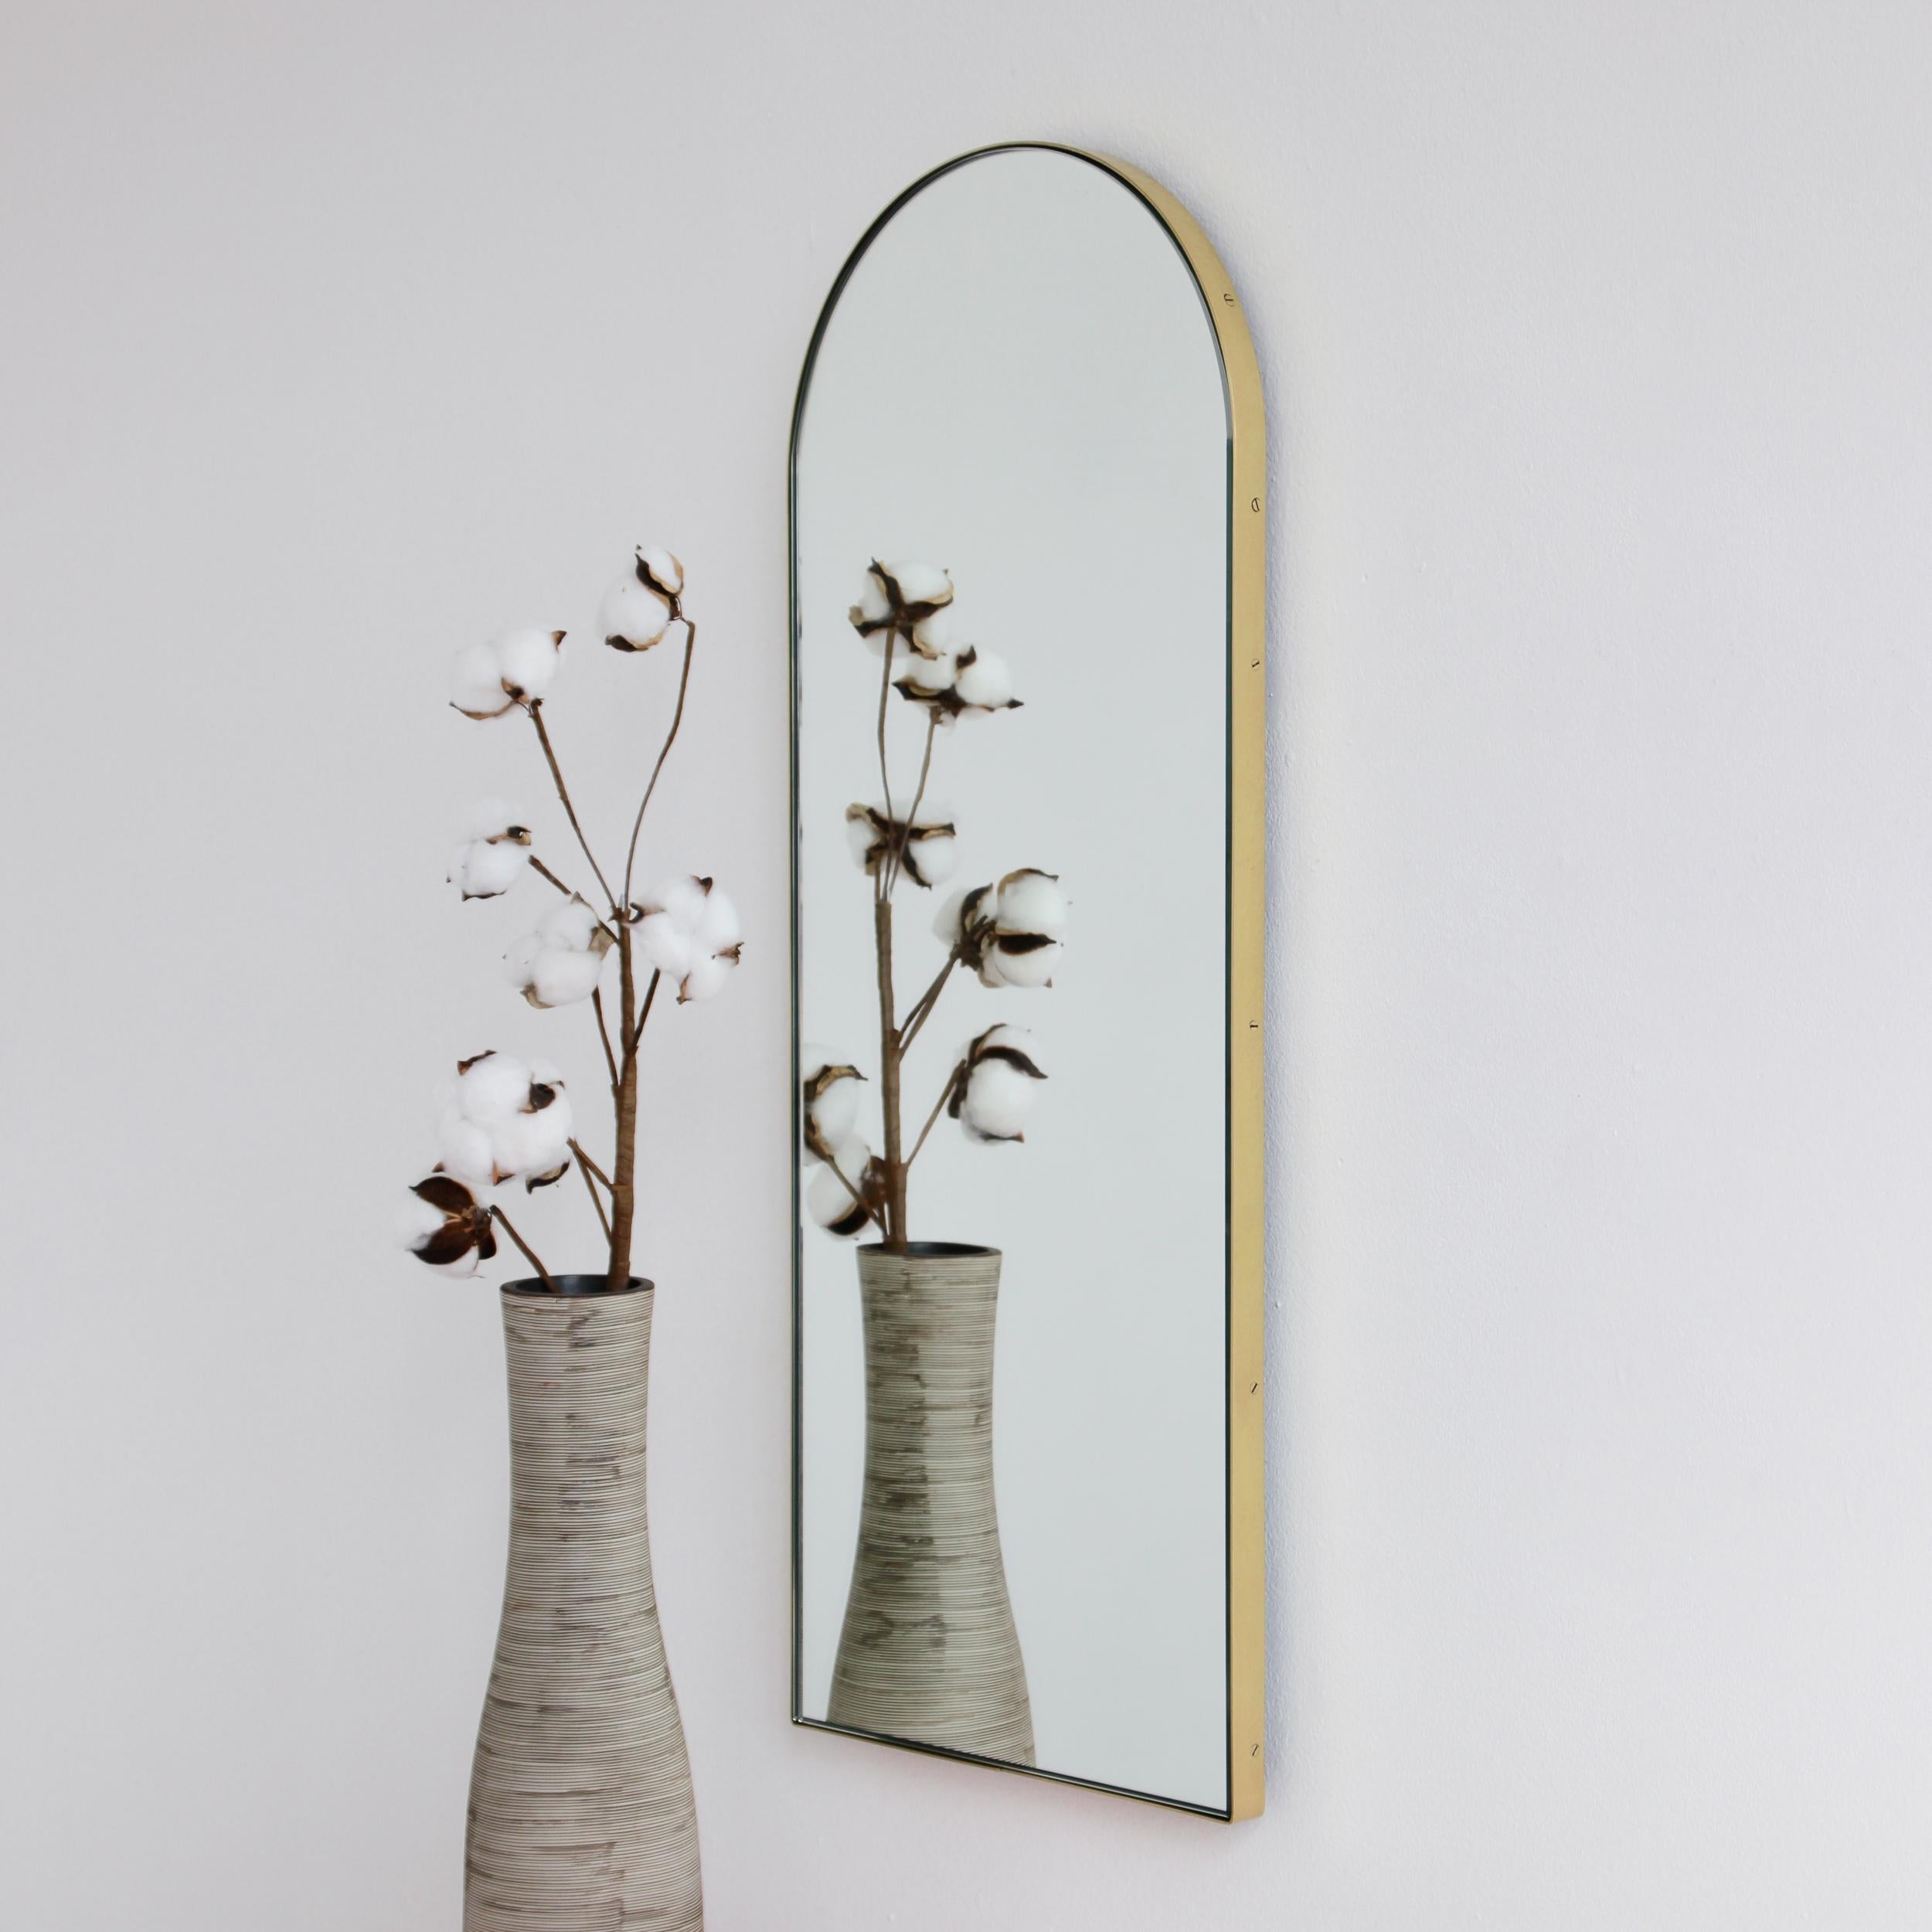 Delightful arch shaped mirror with an elegant solid brushed brass frame. Designed and handcrafted in London, UK.

Medium, large and extra-large (37cm x 56cm, 46cm x 71cm and 48cm x 97cm) mirrors are fitted with an ingenious French cleat (split